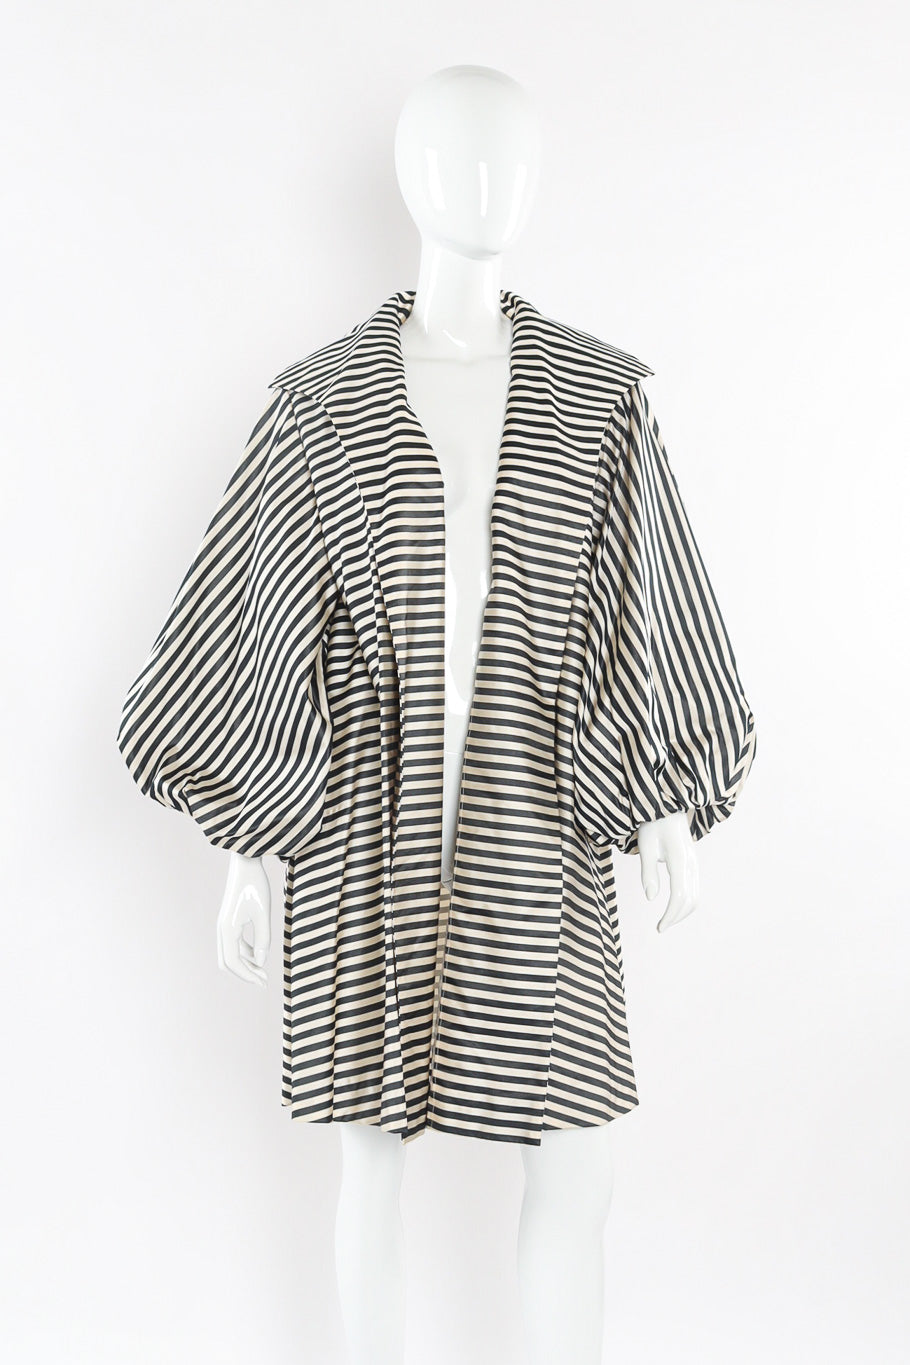 Oversized striped swing coat by Carolyne Roehm Close-up View @recessla